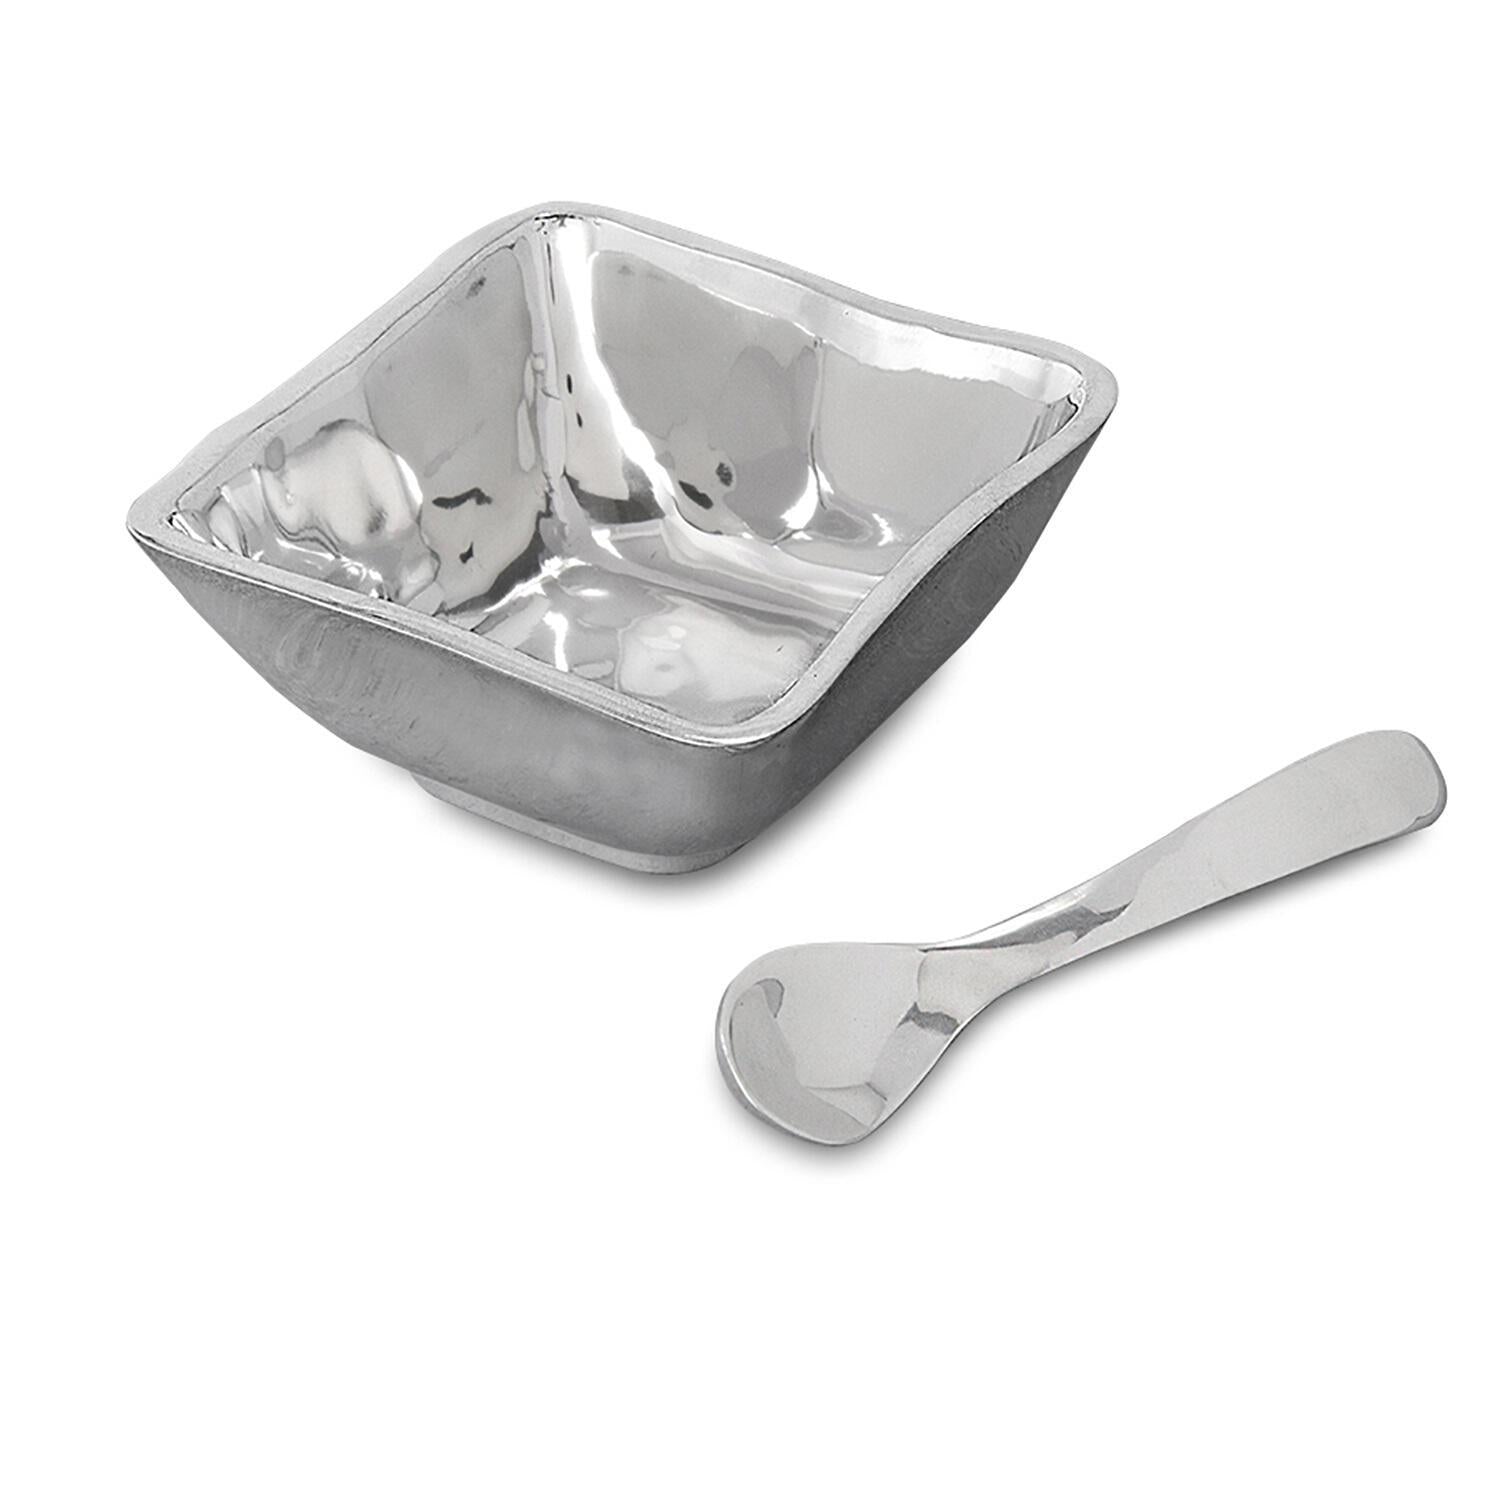 Soho Square Bowl with Spoon - Small